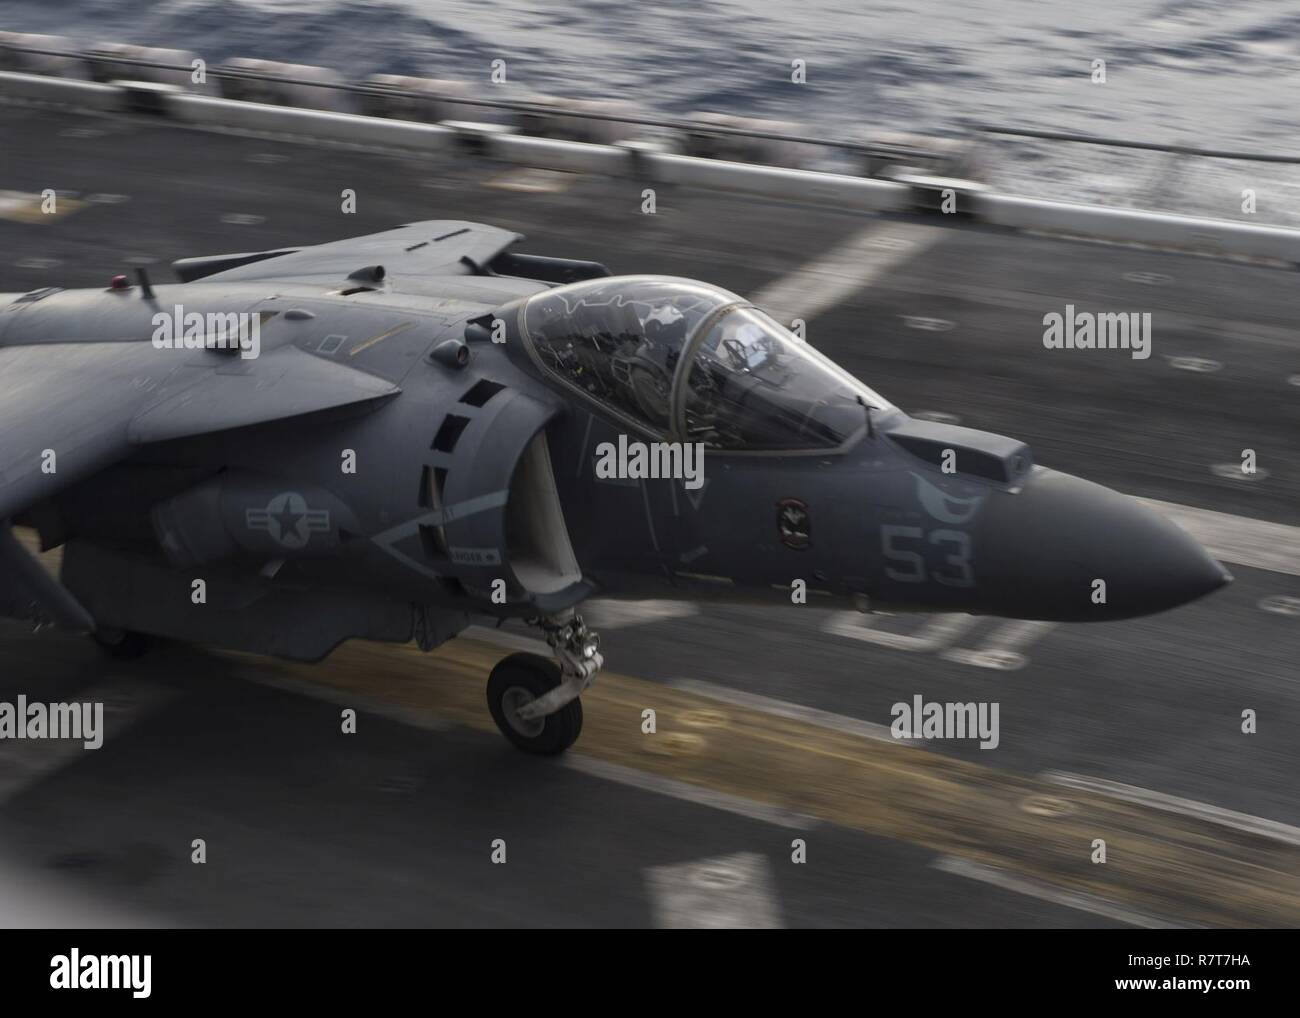 SOUTH CHINA SEA (April 4, 2017) An AV-8B Harrier assigned to the “Ridge Runners” of Marine Medium Tiltrotor Squadron (VMM) 163 launches from the flight deck of the amphibious assault ship USS Makin Island (LHD 8). Makin Island, the flagship for the Makin Island Amphibious Ready Group, with the embarked 11th Marine Expeditionary Unit (11th MEU), is operating in the Indo-Asia-Pacific region to enhance amphibious capability with regional partners and to serve as a ready-response force for any type of contingency. Stock Photo